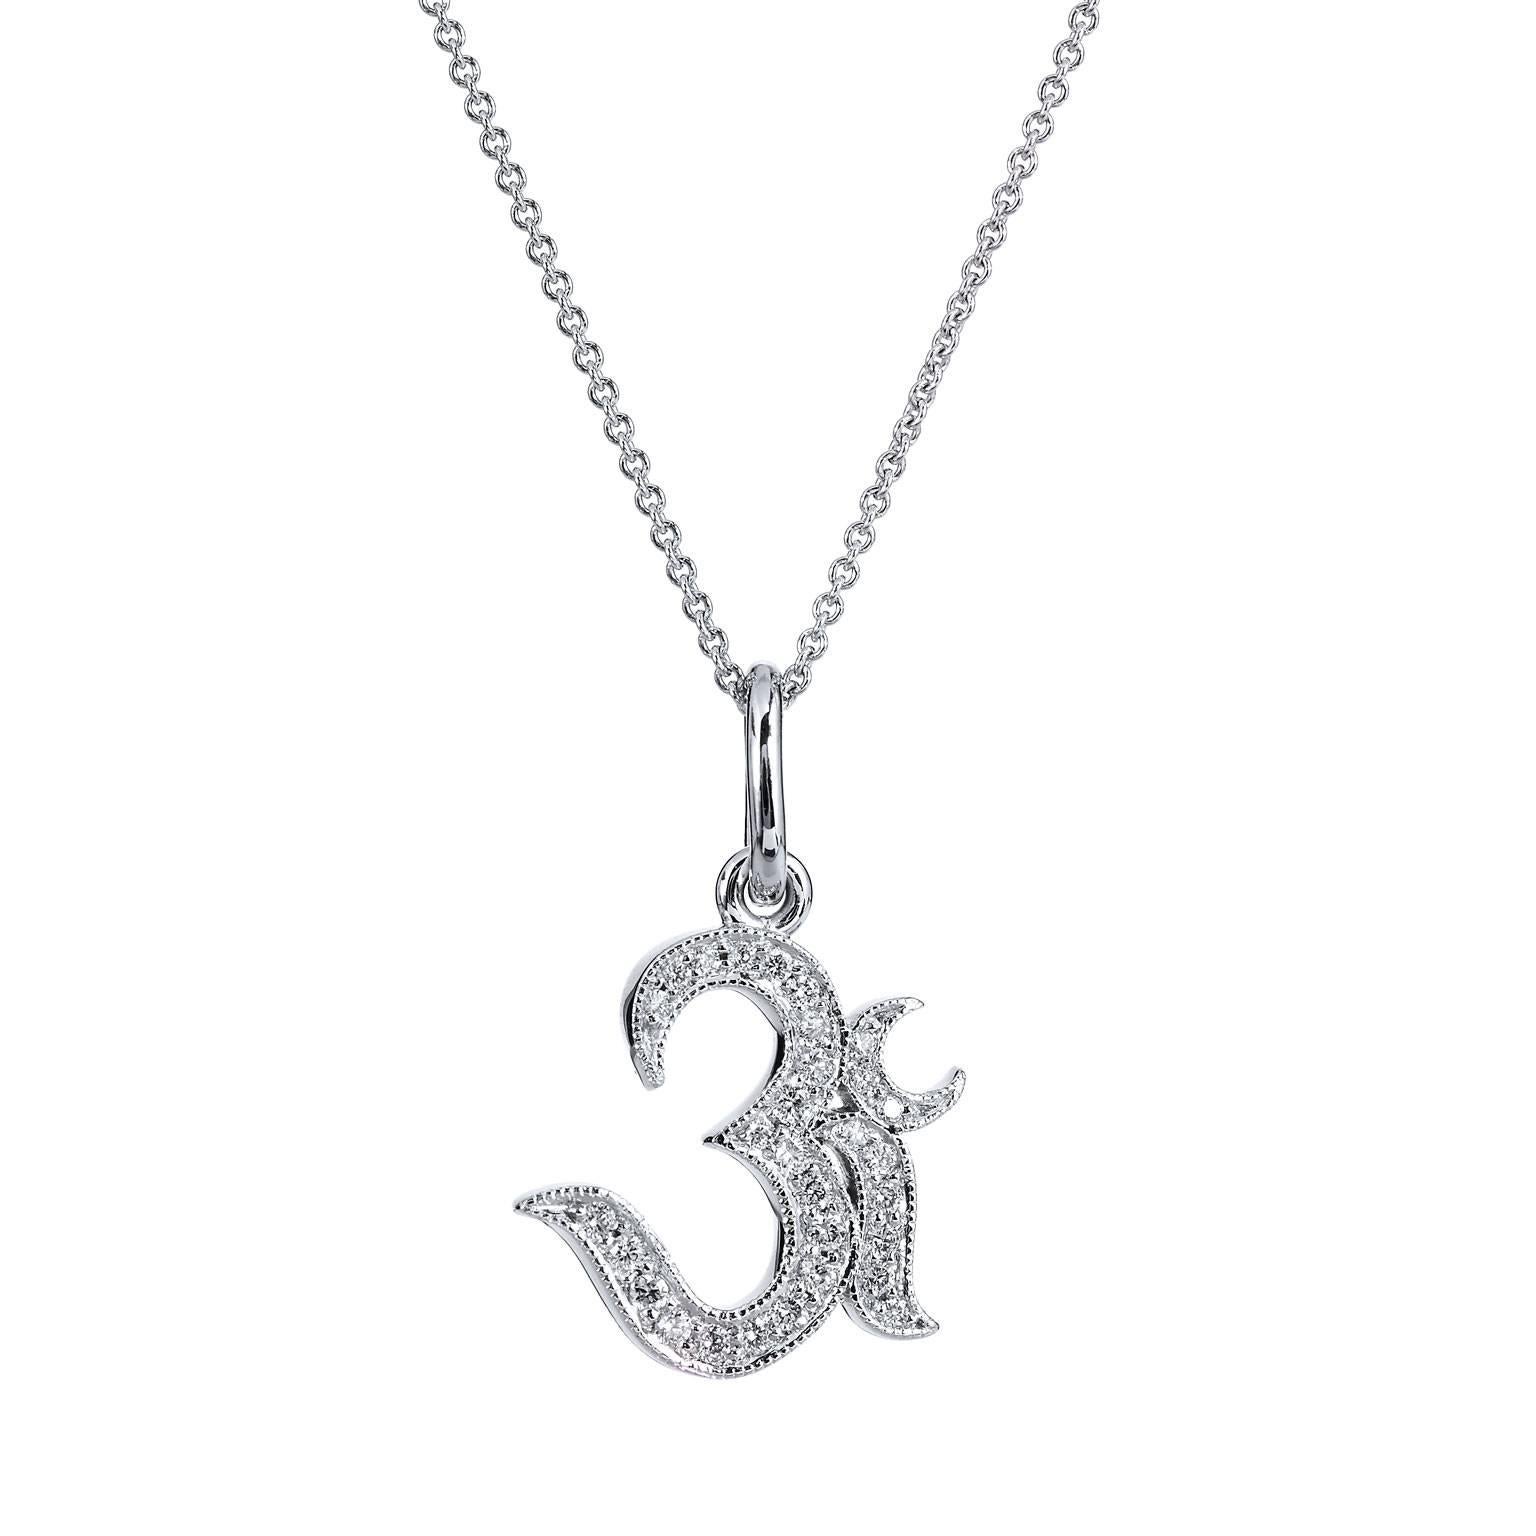 Behold the glimmer of 0.15 carat of pave set diamond (G/H/VS) in this lovely handcrafted Ohm pendant necklace. Ohm is the primordial sound of the universe. Let the boundless radiance of this H and H diamond pendant necklace sparkle with continuity